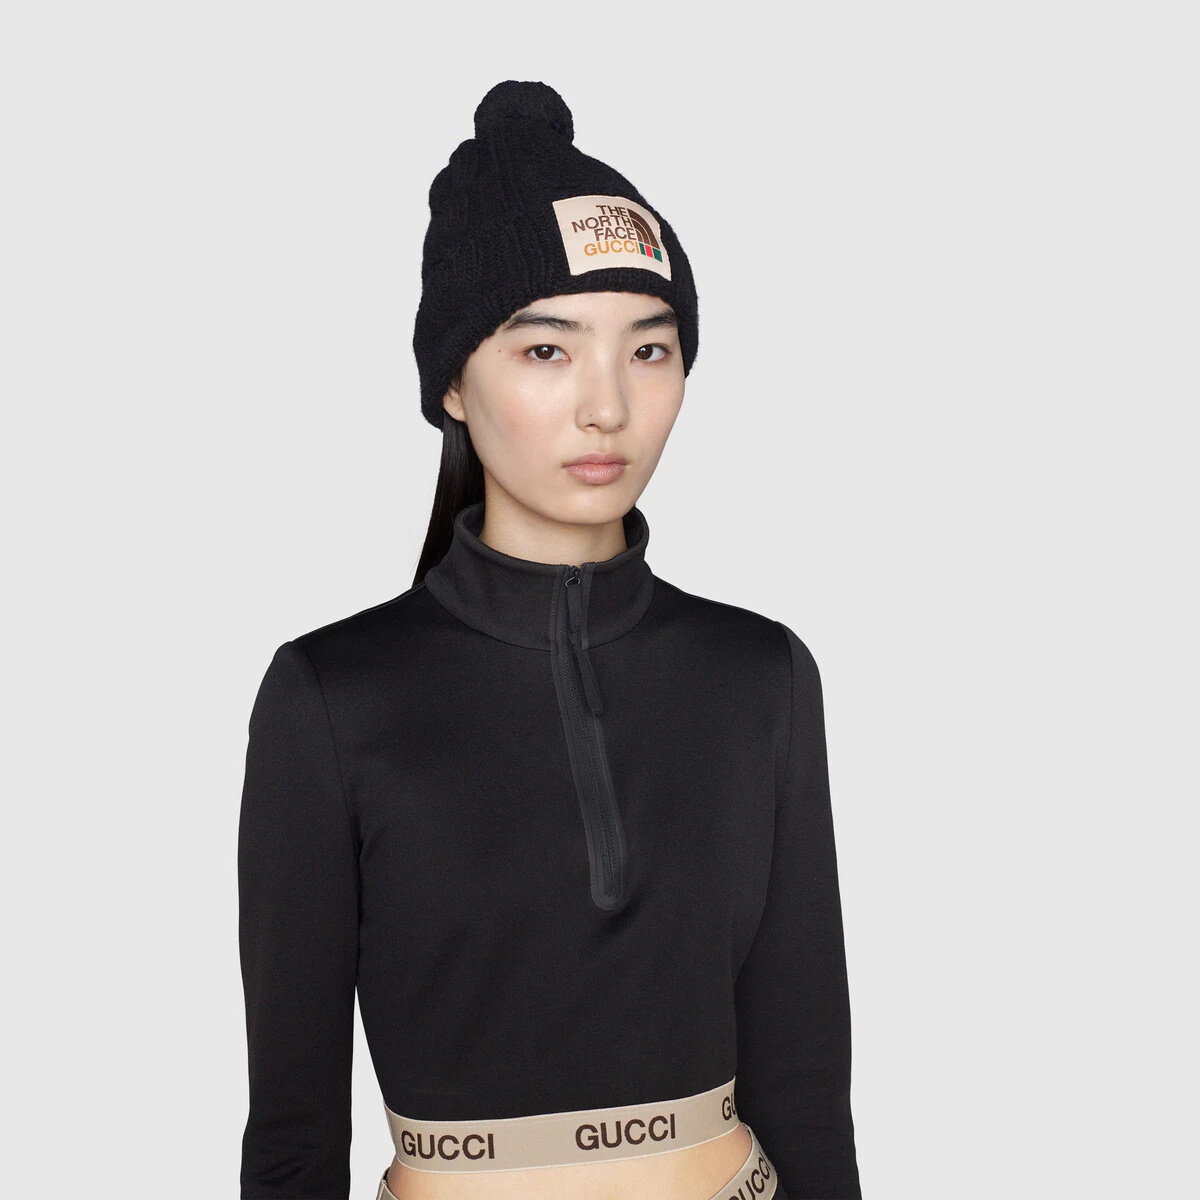 The North Face x Gucci cropped top - 5